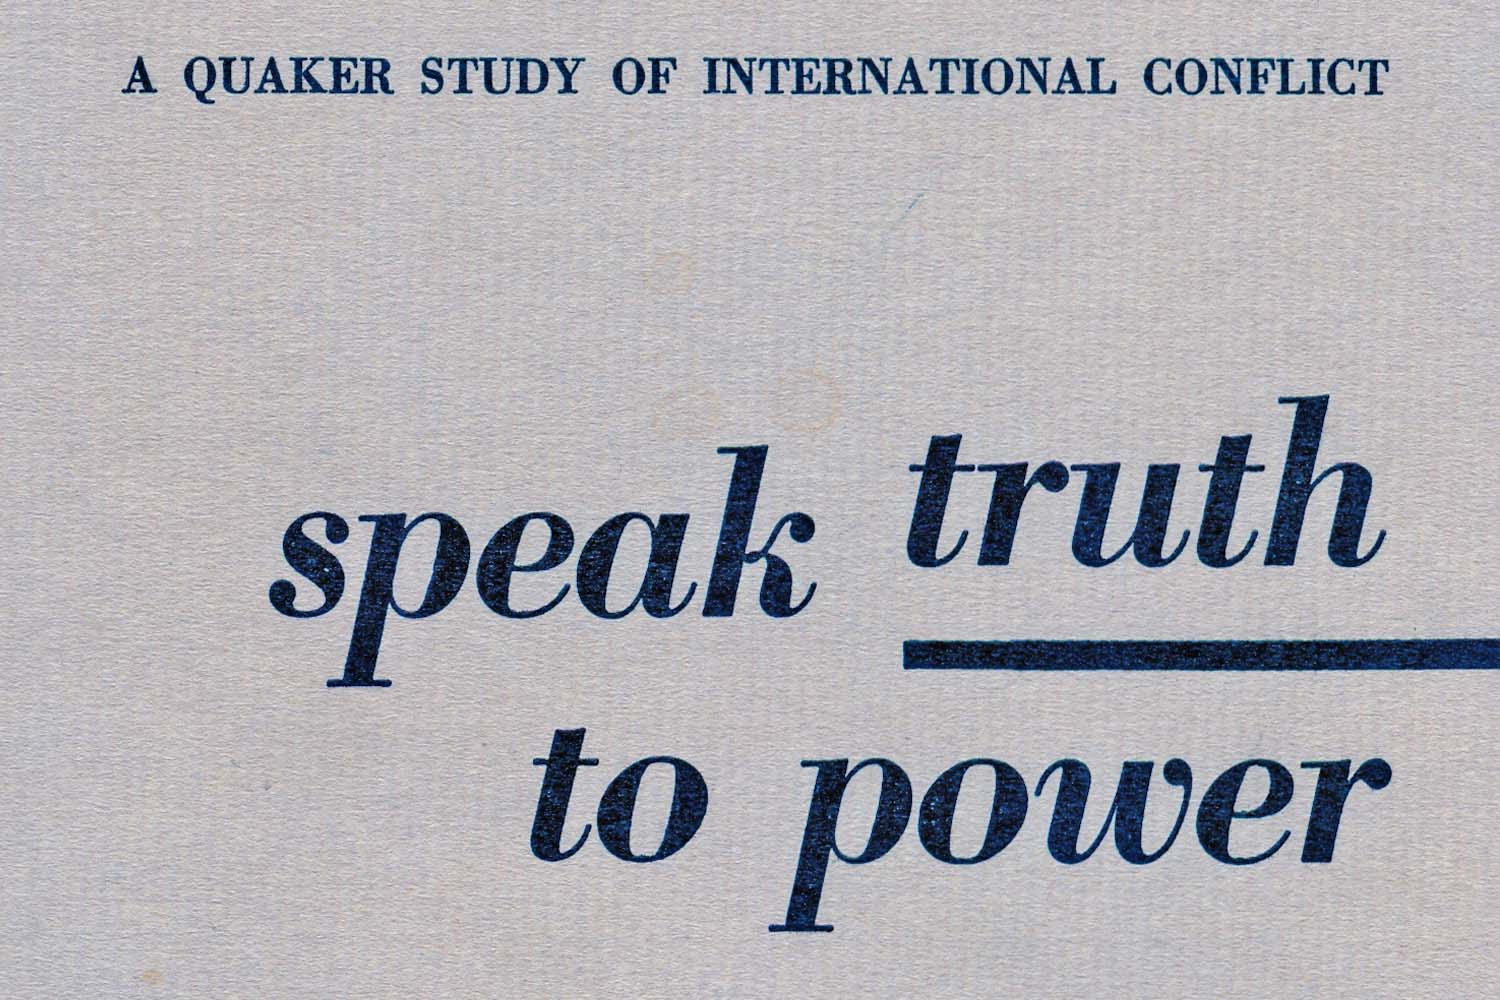 Cover of a book titled Speak Truth to Power